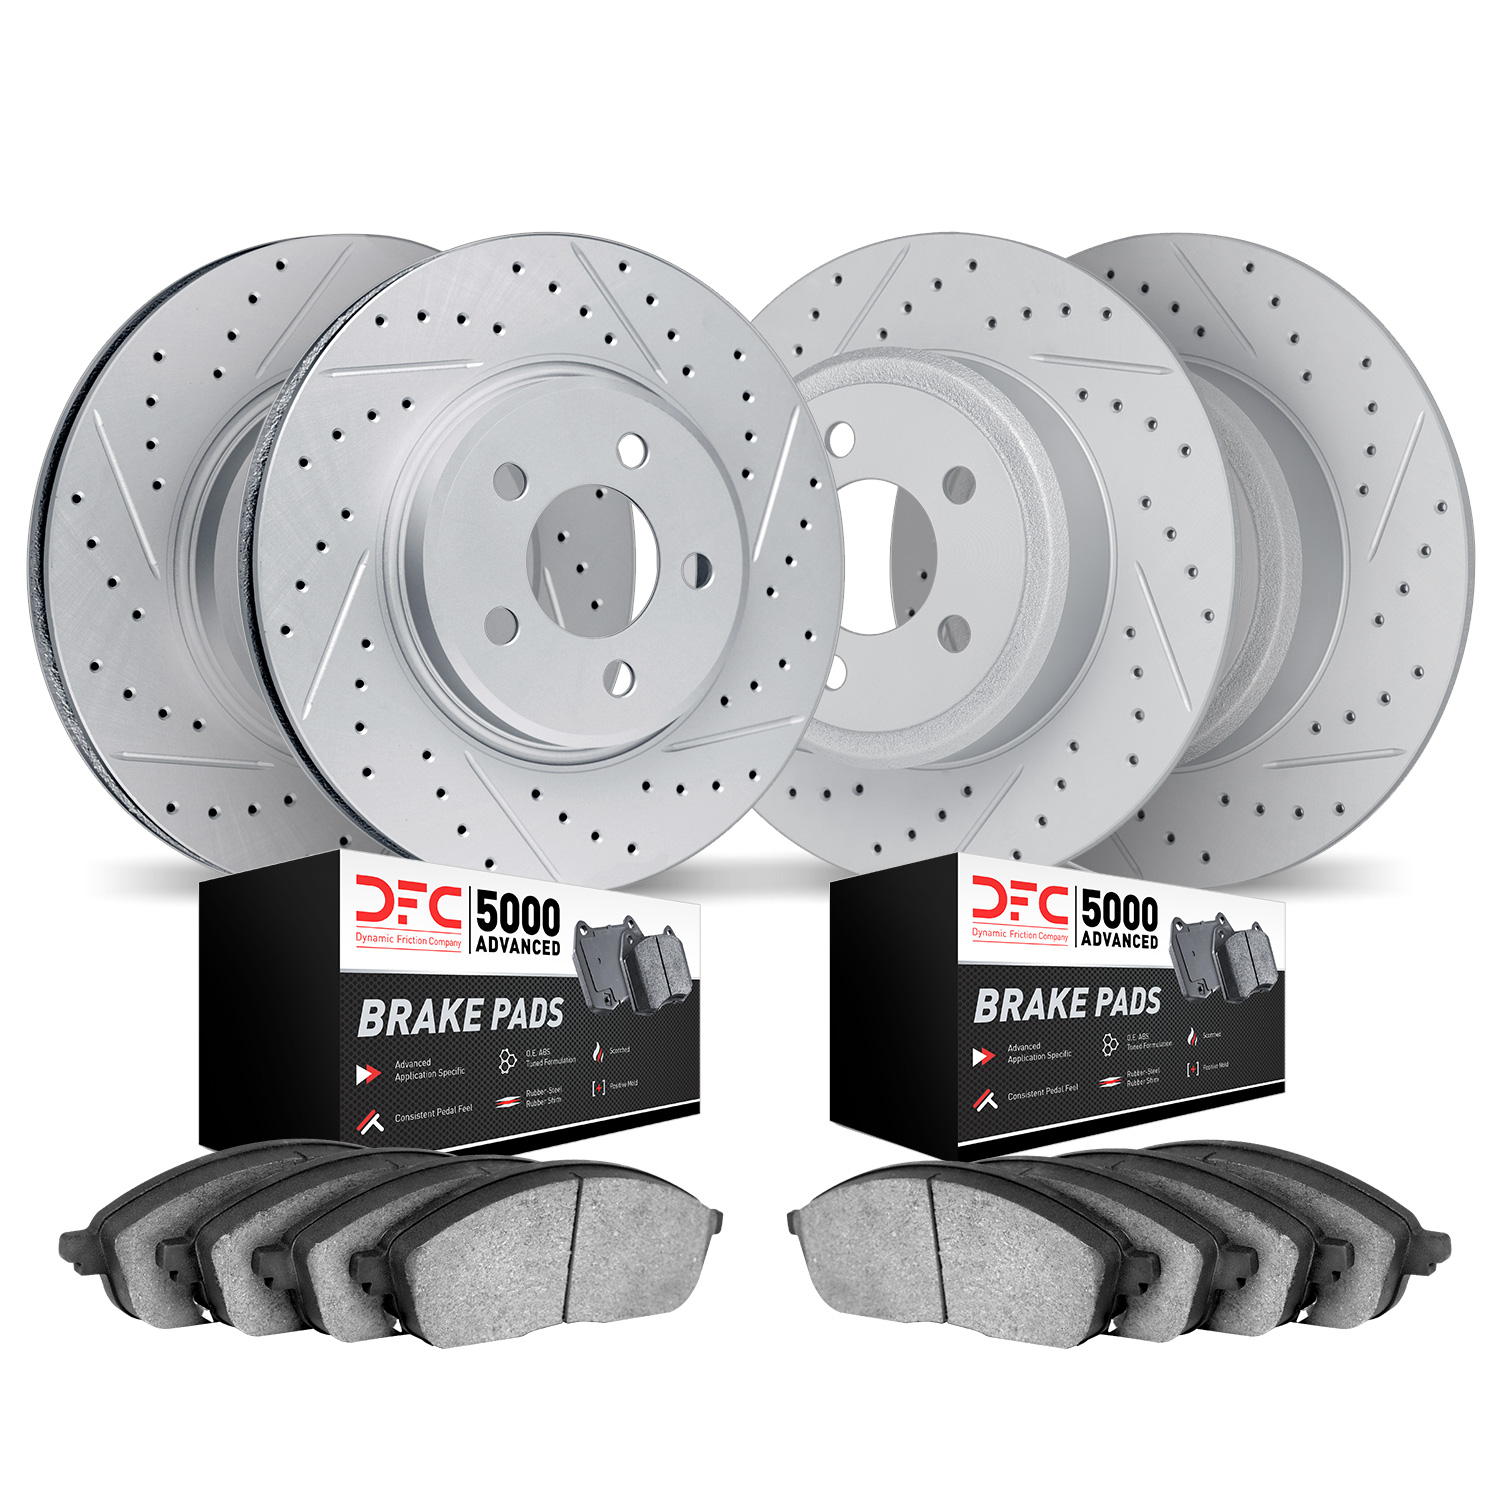 2504-54238 Geoperformance Drilled/Slotted Rotors w/5000 Advanced Brake Pads Kit, 2001-2002 Ford/Lincoln/Mercury/Mazda, Position: